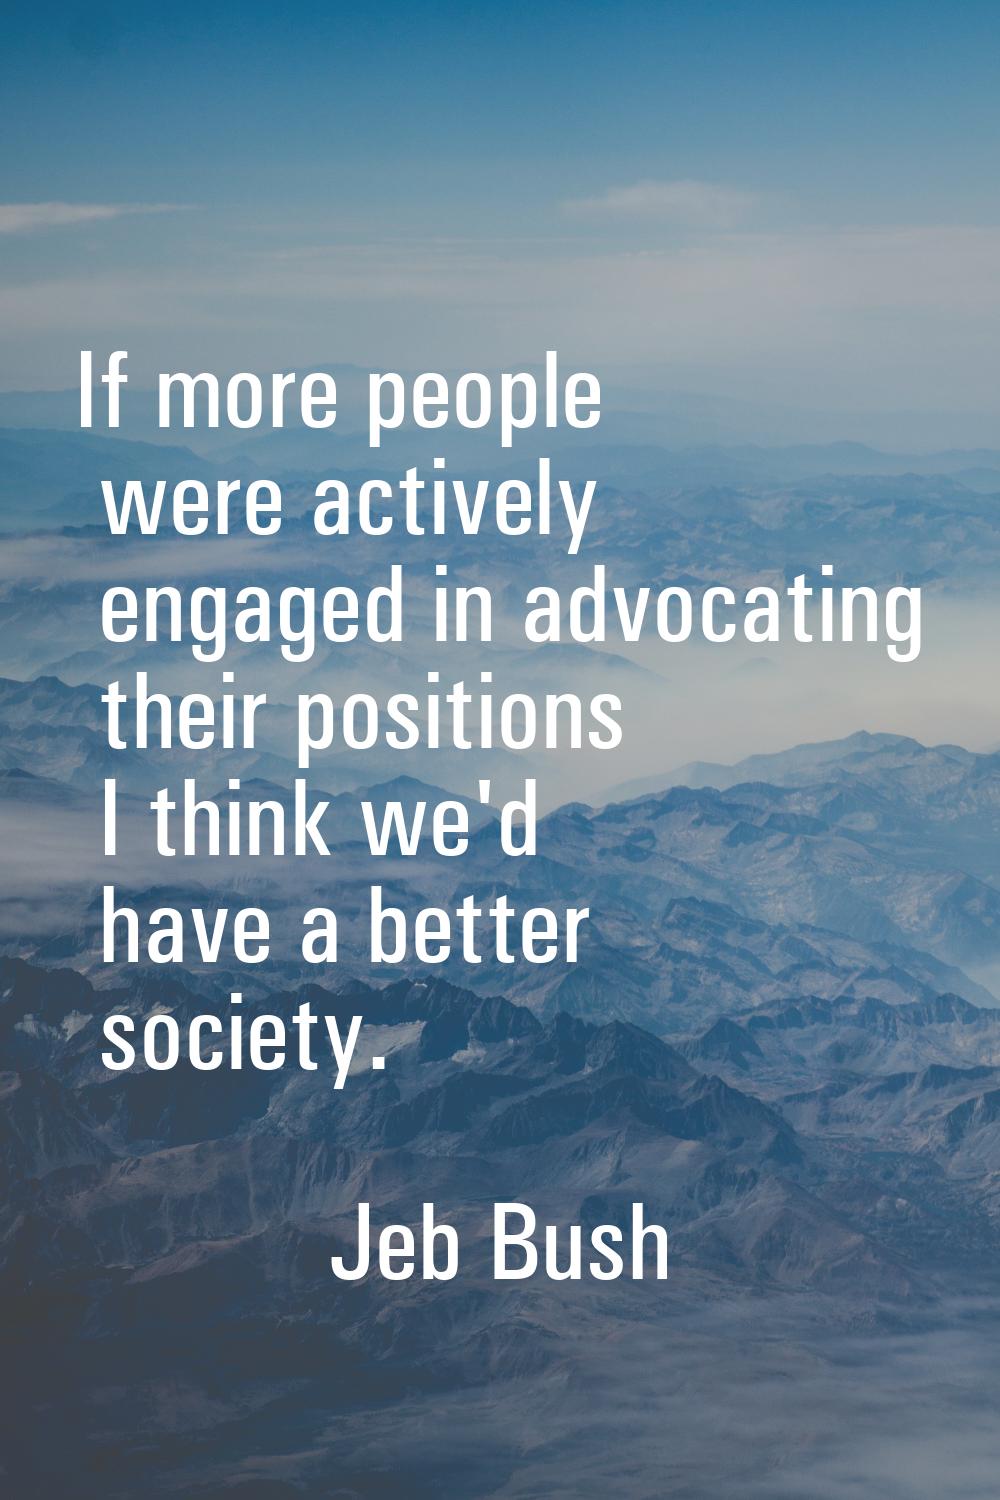 If more people were actively engaged in advocating their positions I think we'd have a better socie